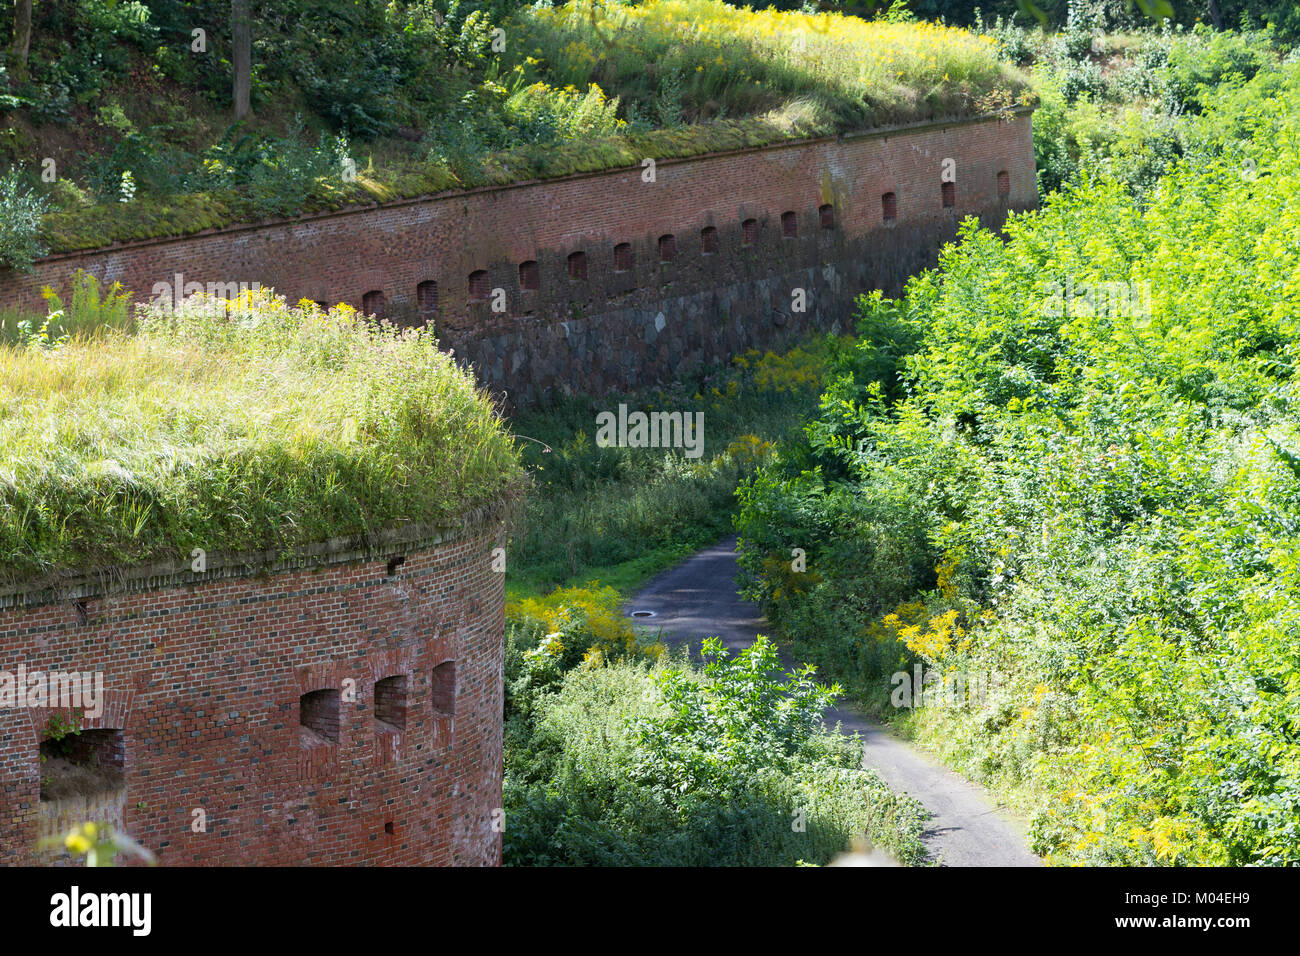 Boyen Fortress is a former Prussian fortress located in the western part of Gizycko, in Warmian-Masurian Voivodeship, northeastern Poland. Stock Photo